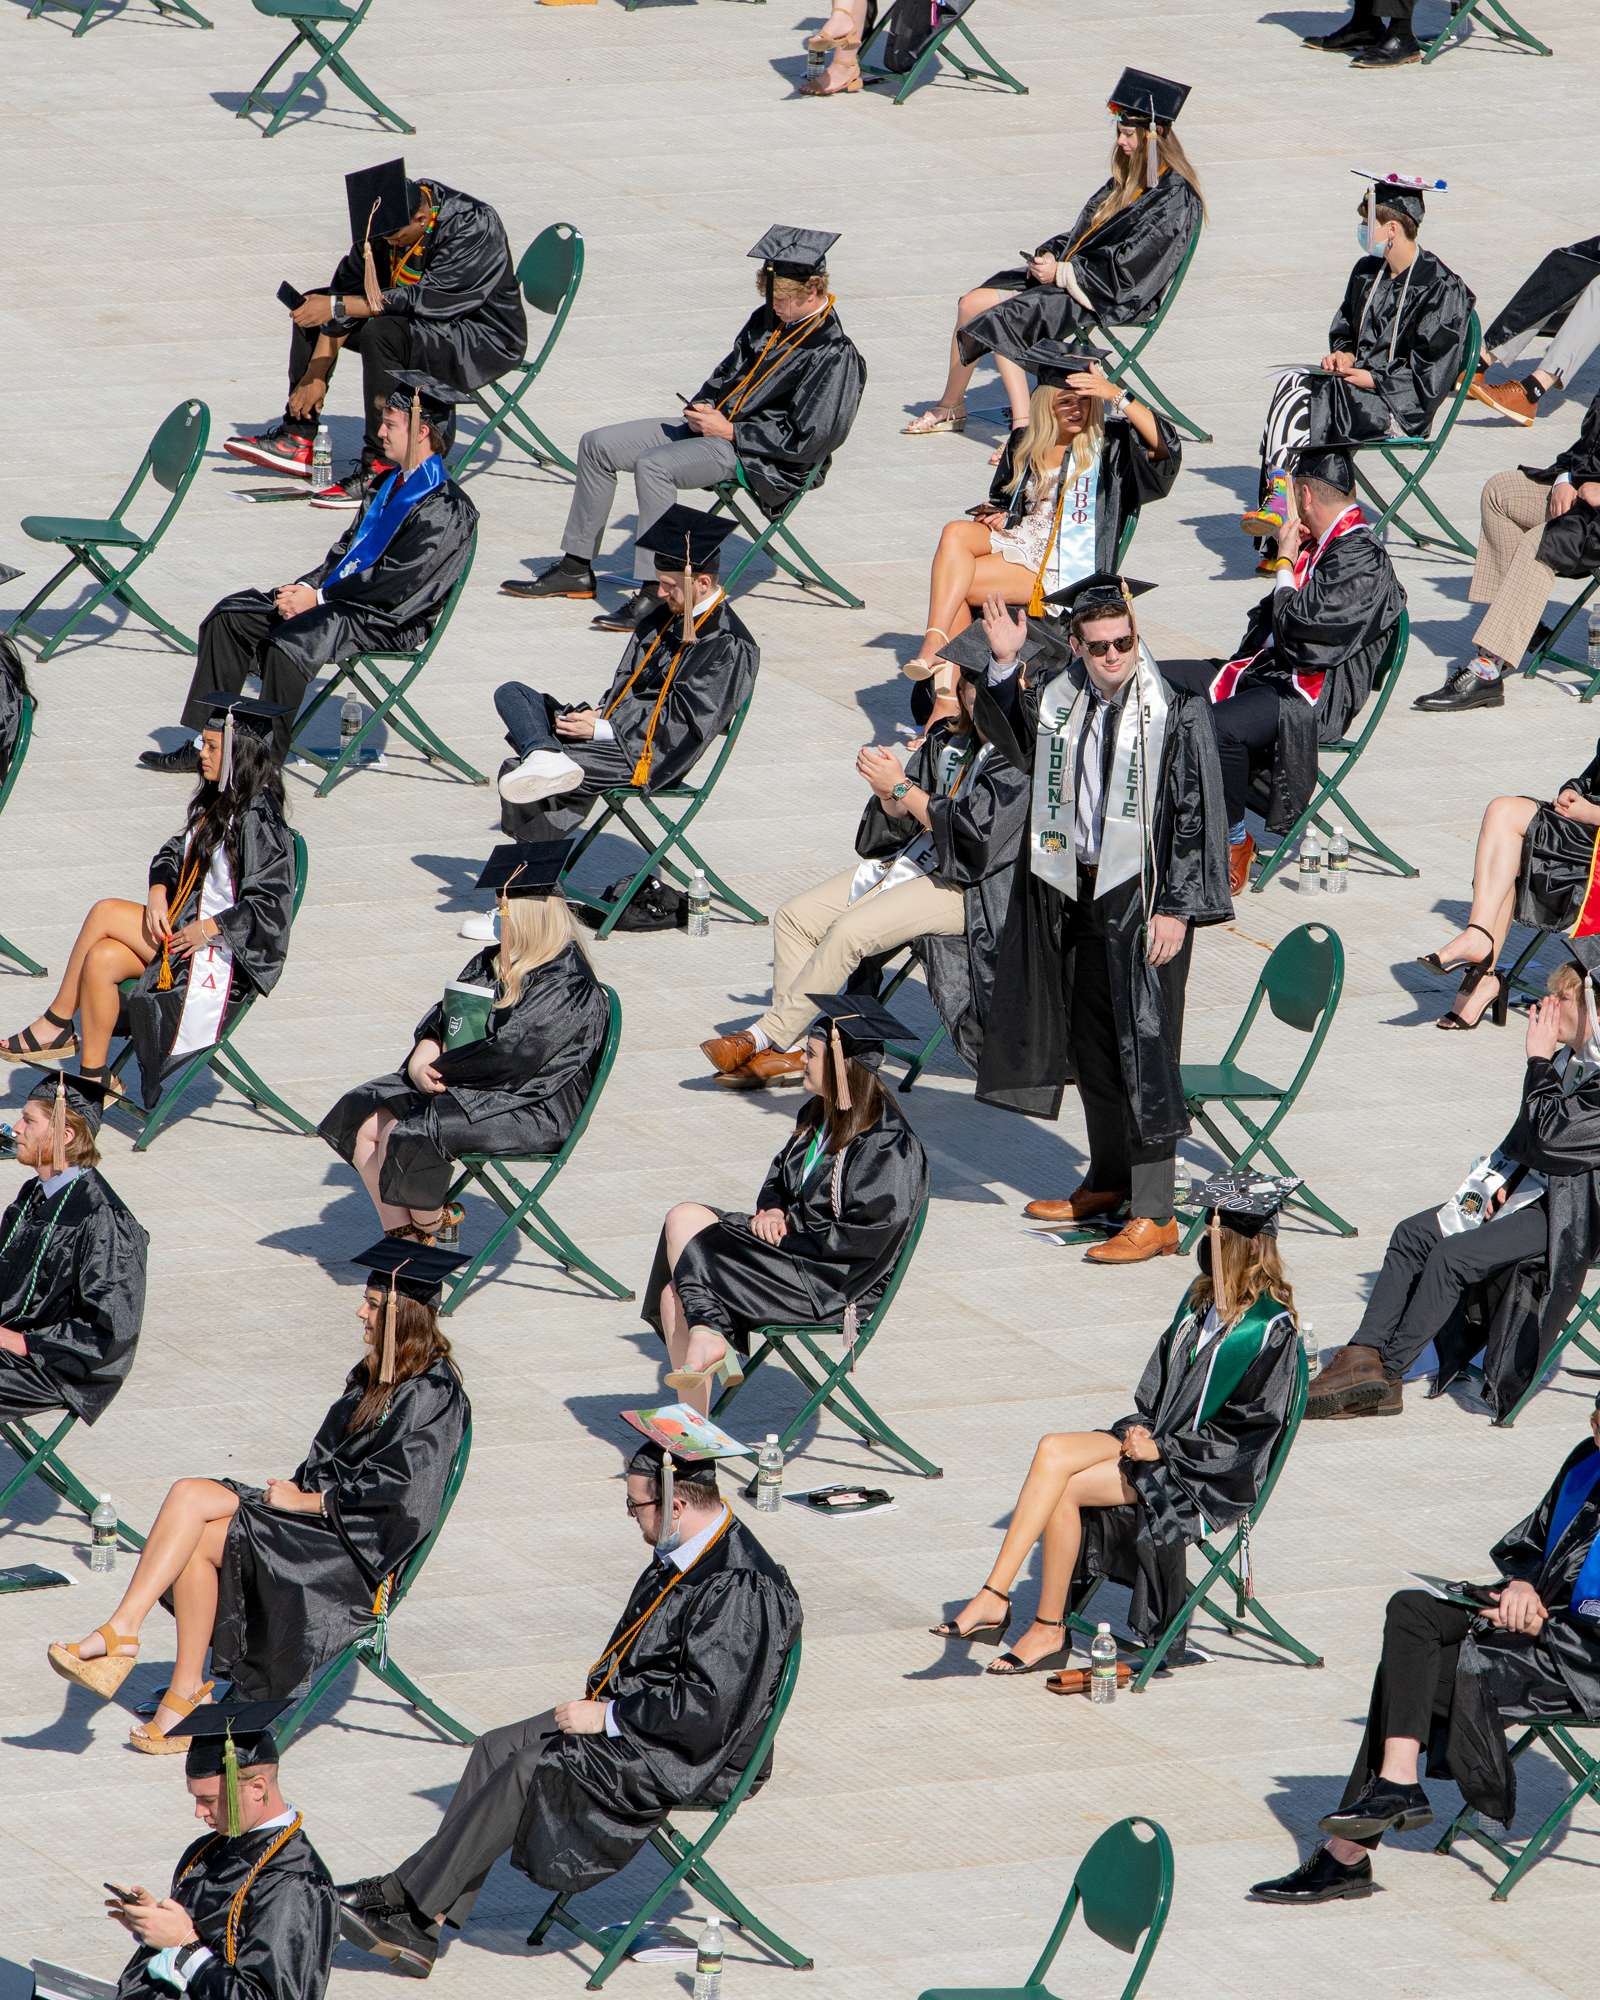 Students await their turn to graduate during commencement